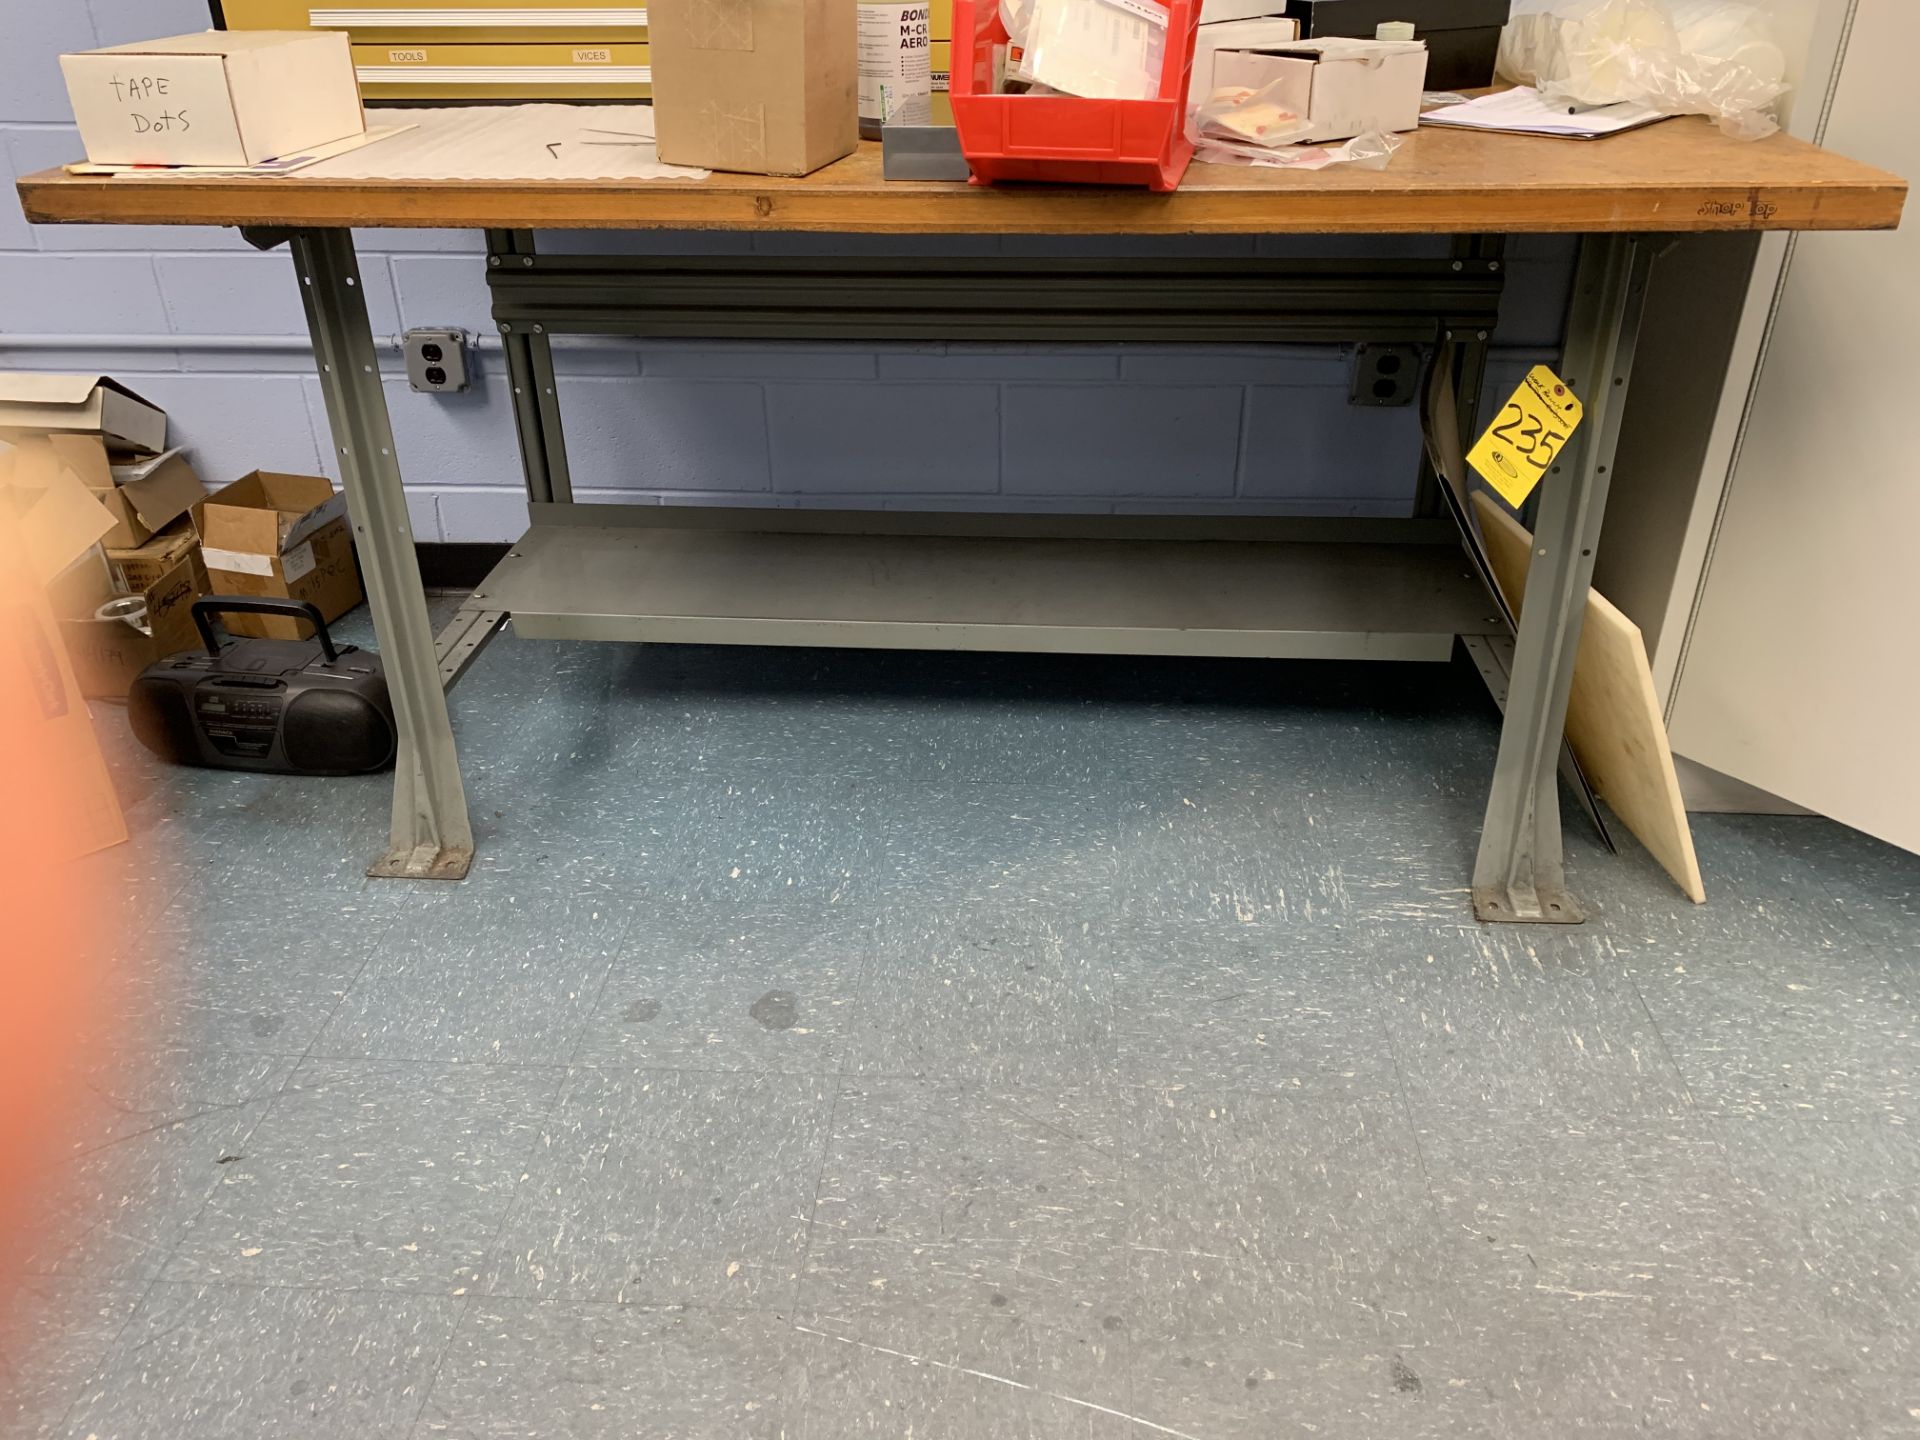 72 IN. SHOP TOP WORK BENCH WITH BACK SPLASH - CONTENTS NOT INCLUDED - Image 2 of 2